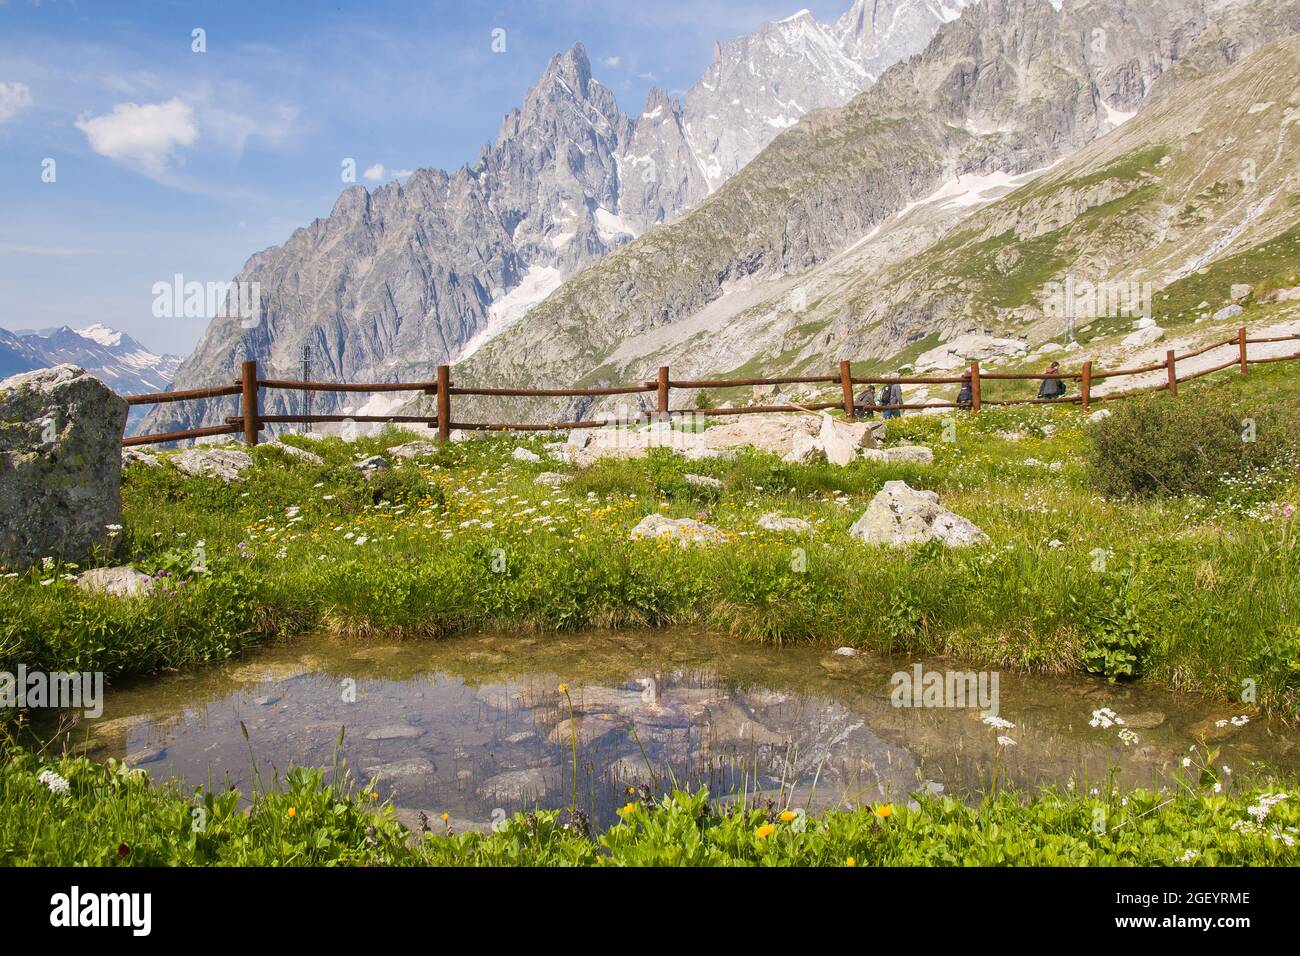 Mont Blanc massif: view of the Saussurea Botanic Garden with idyllic little lake in Aosta Valley, Italy Stock Photo